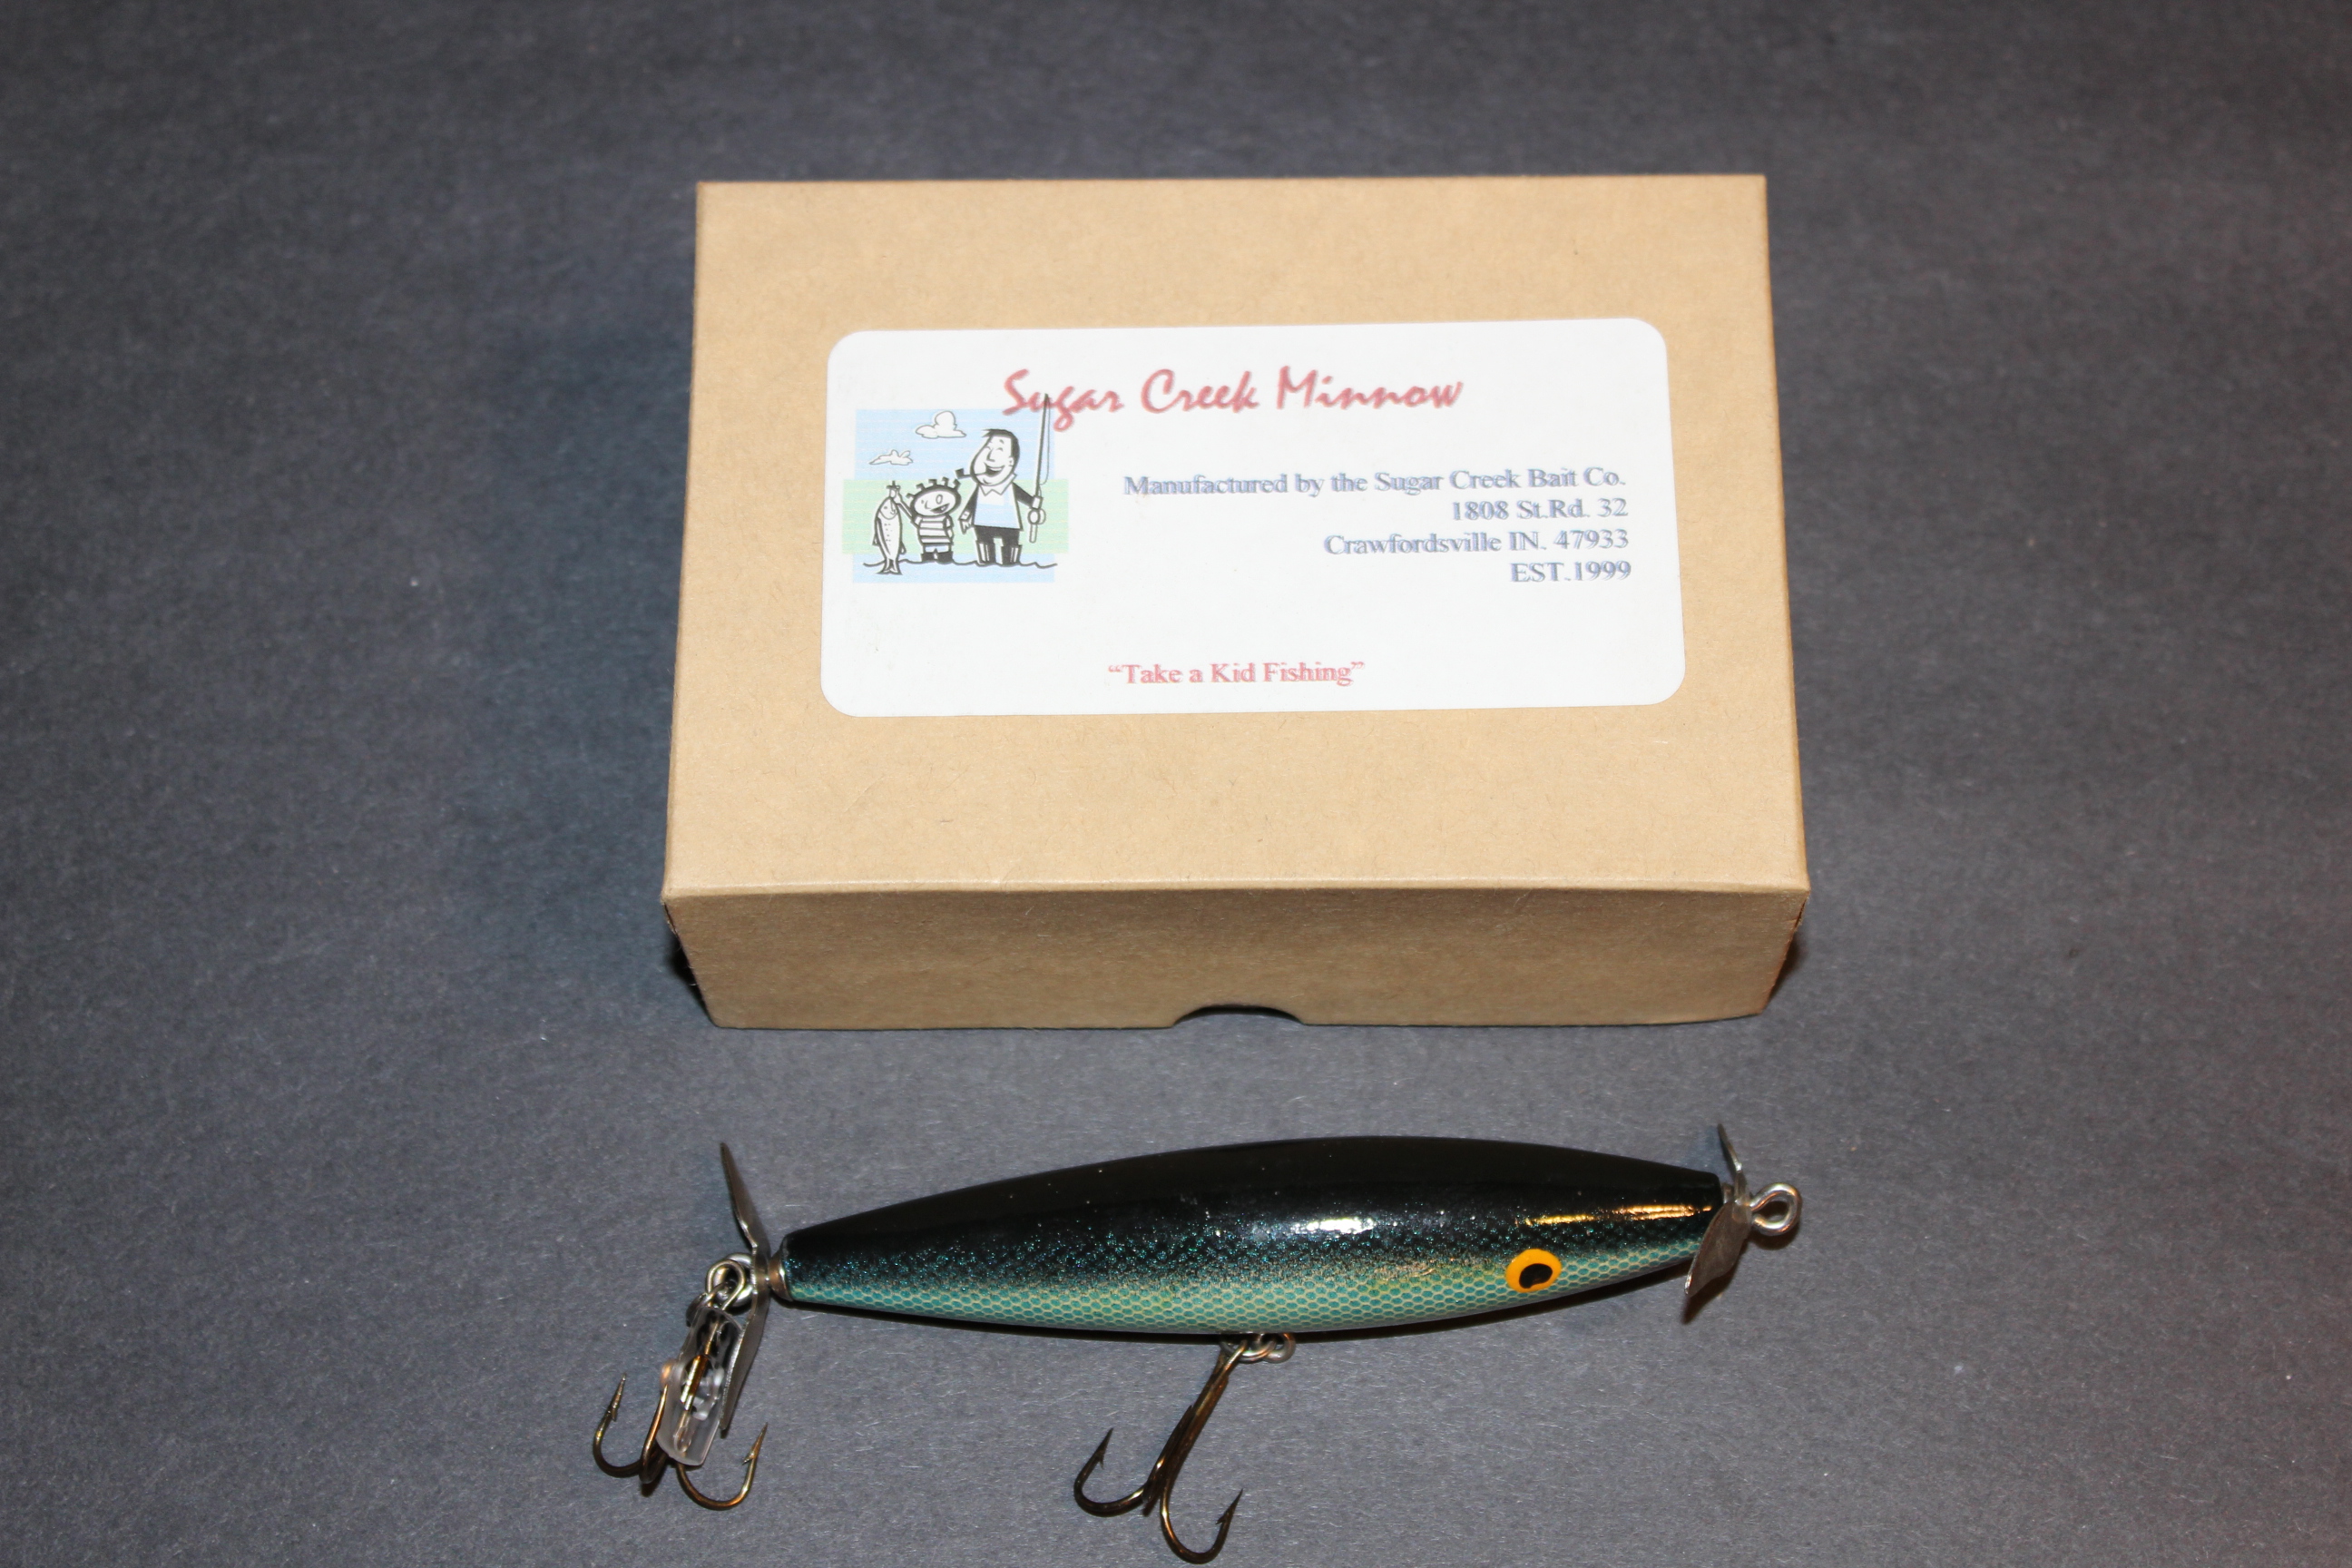 Mars Hill Skipper Bill Lure – Old Indiana Lures